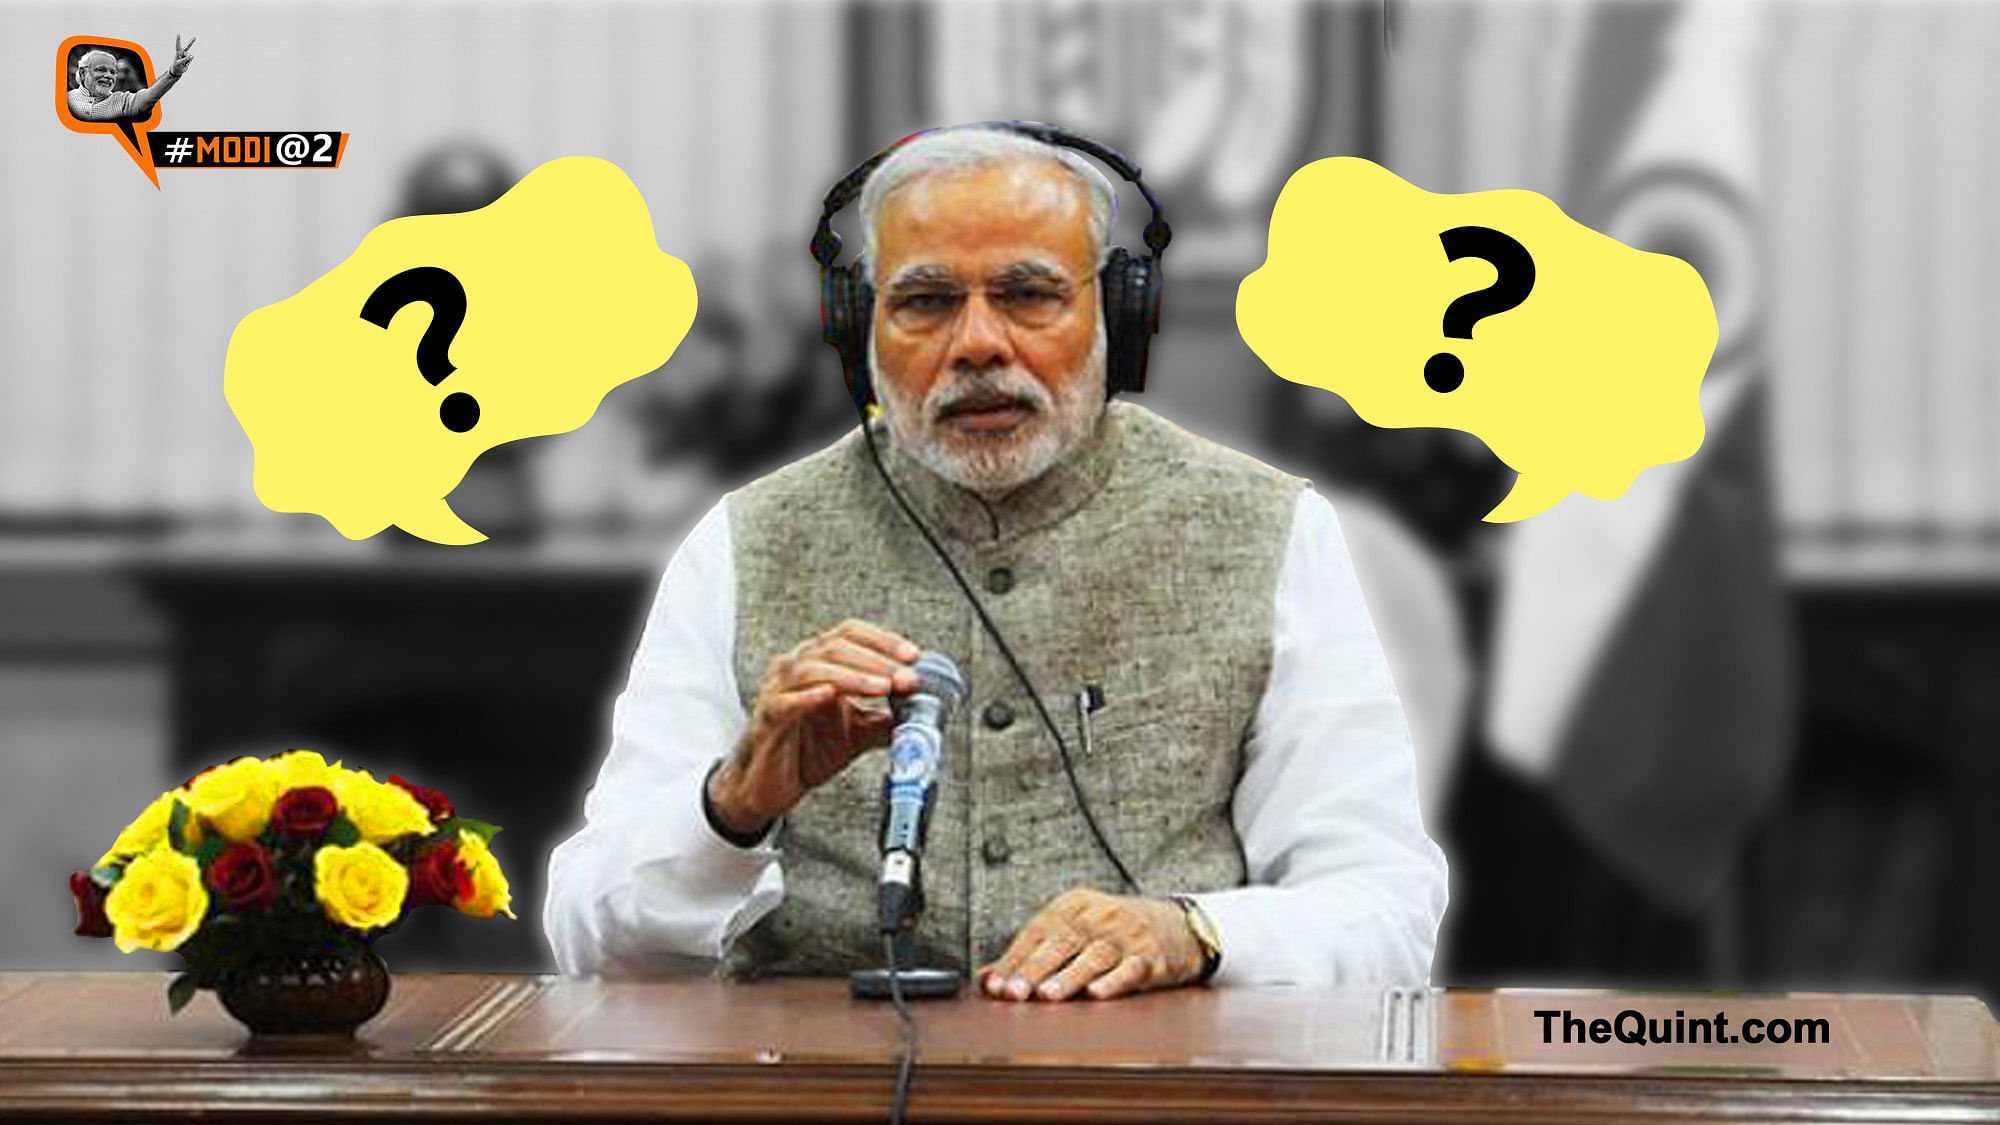 File photo of PM Modi during on of his <i>Mann ki Baat </i>broadcasts. (Image altered by <b>The Quint</b>)